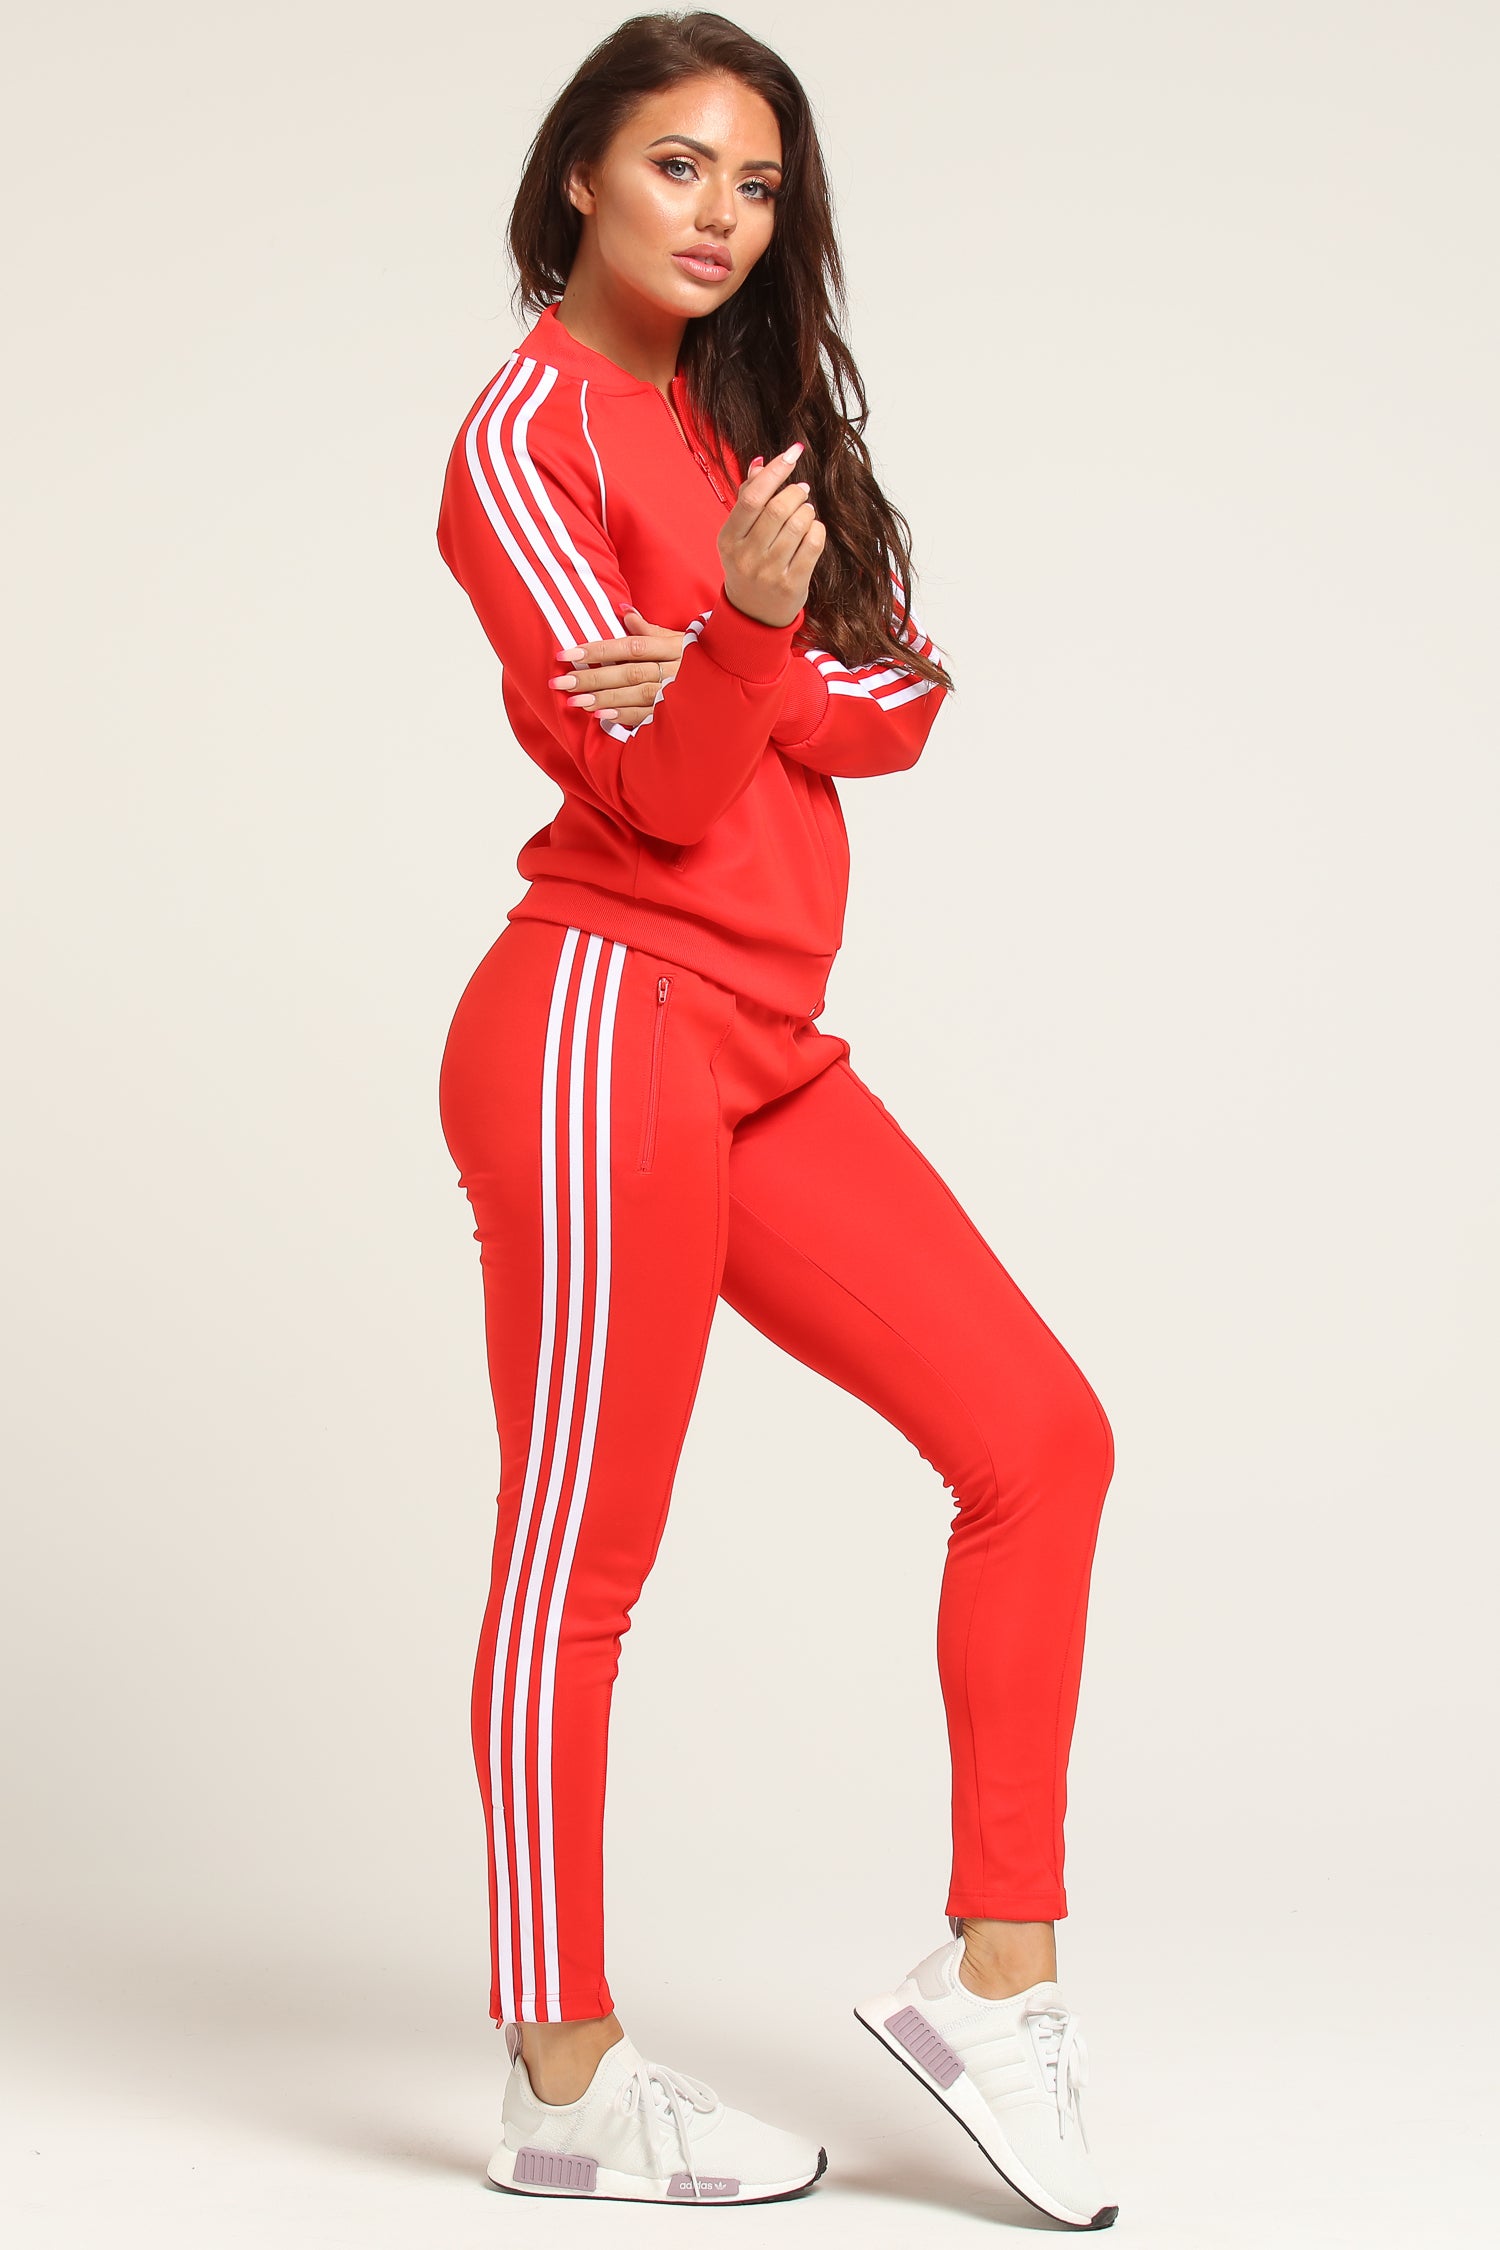 Adidas Women's Love Tracksuit Pants Red 